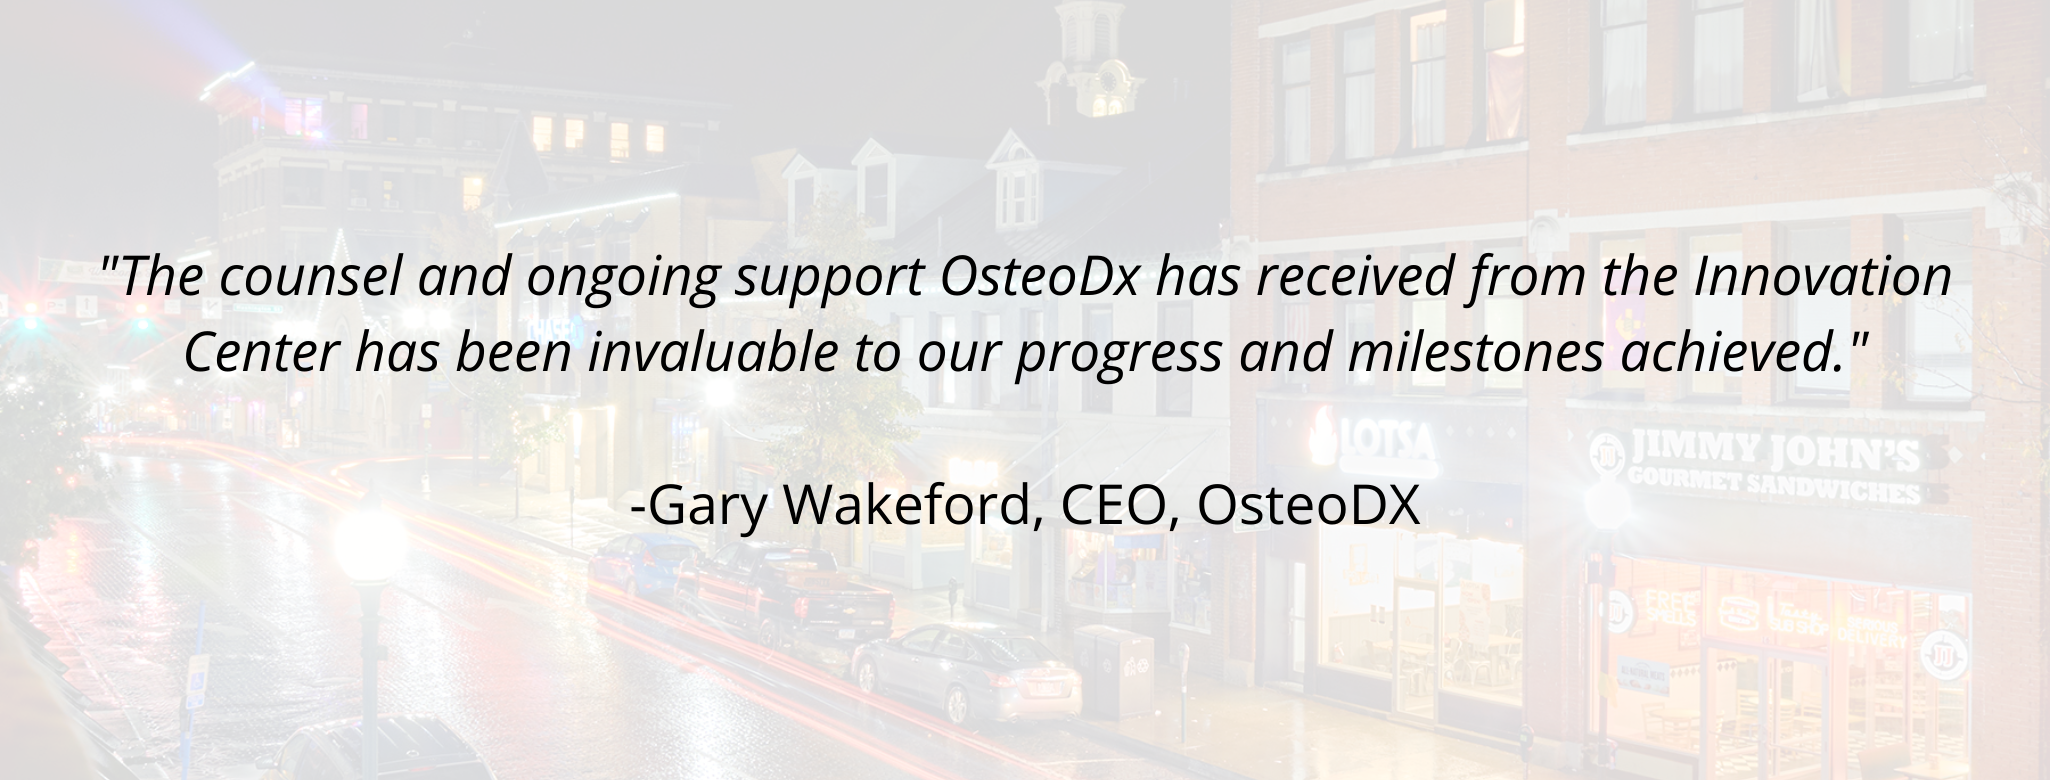 "The counsel and ongoing support OsteoDx has received from the Innovation Center has been invaluable to our progress and milestones achieved." - Gary Wakeford, CEO, OsteoDX